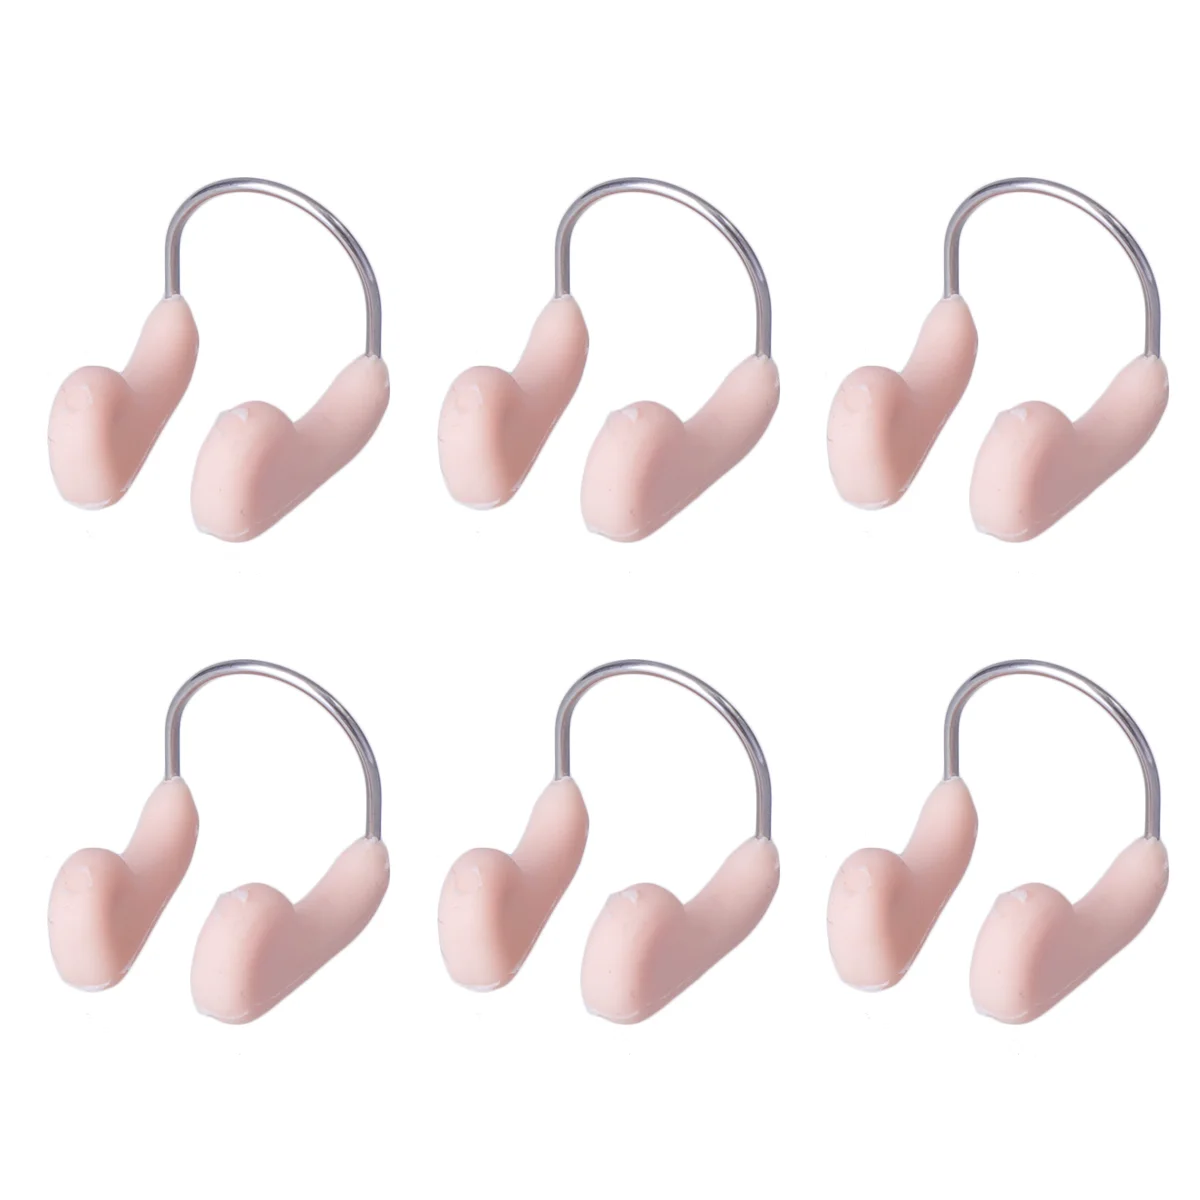 

Nose Clip Swimming Pool Silicone Plugs Plug Swim Clips Protector Kids Wire Pincher Clamps Guard Training Water Swimmers Skin